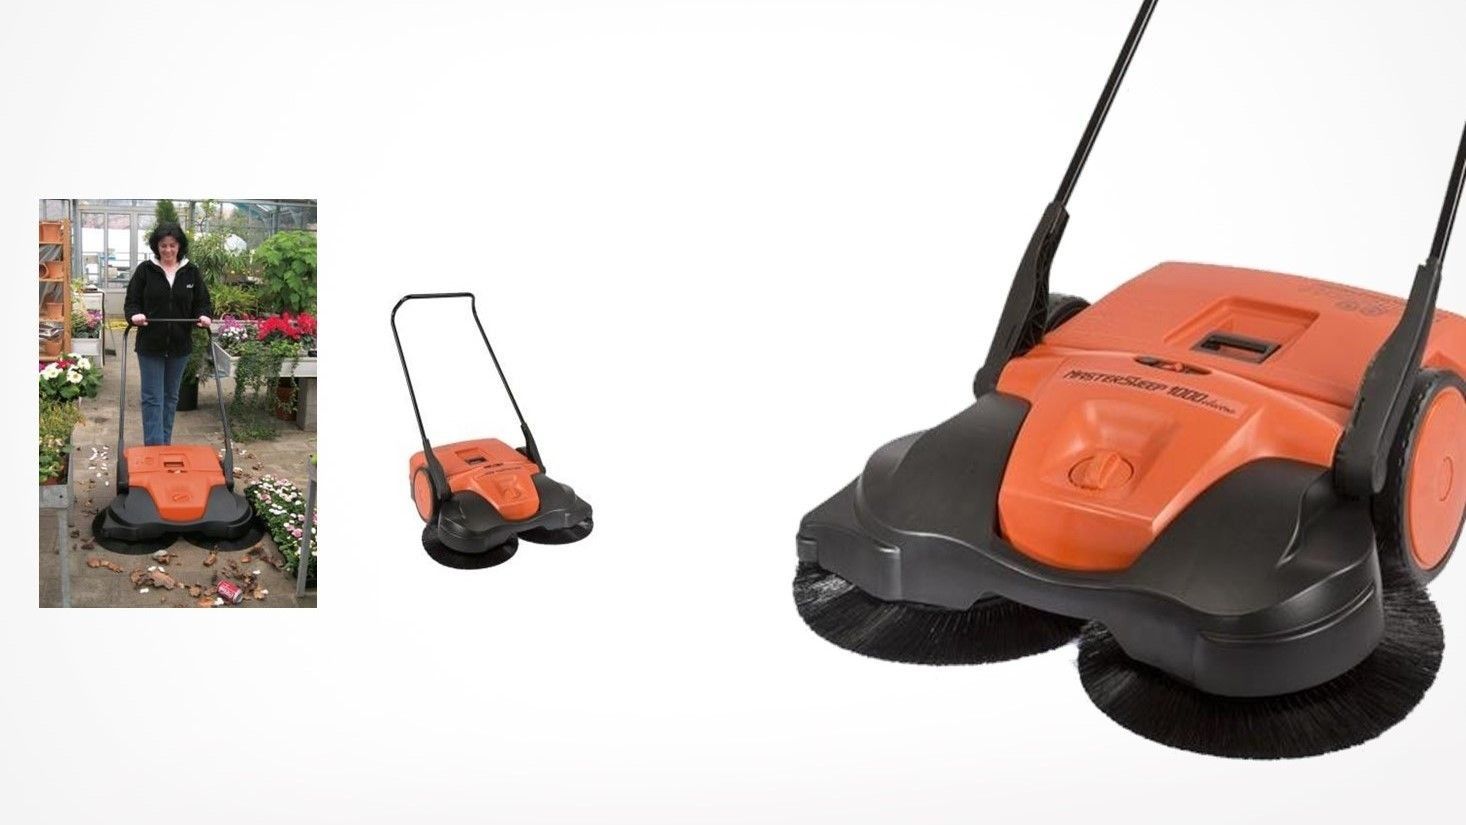 Overview Haaga sweeper Masterswwp 1000 Photo in use and product details